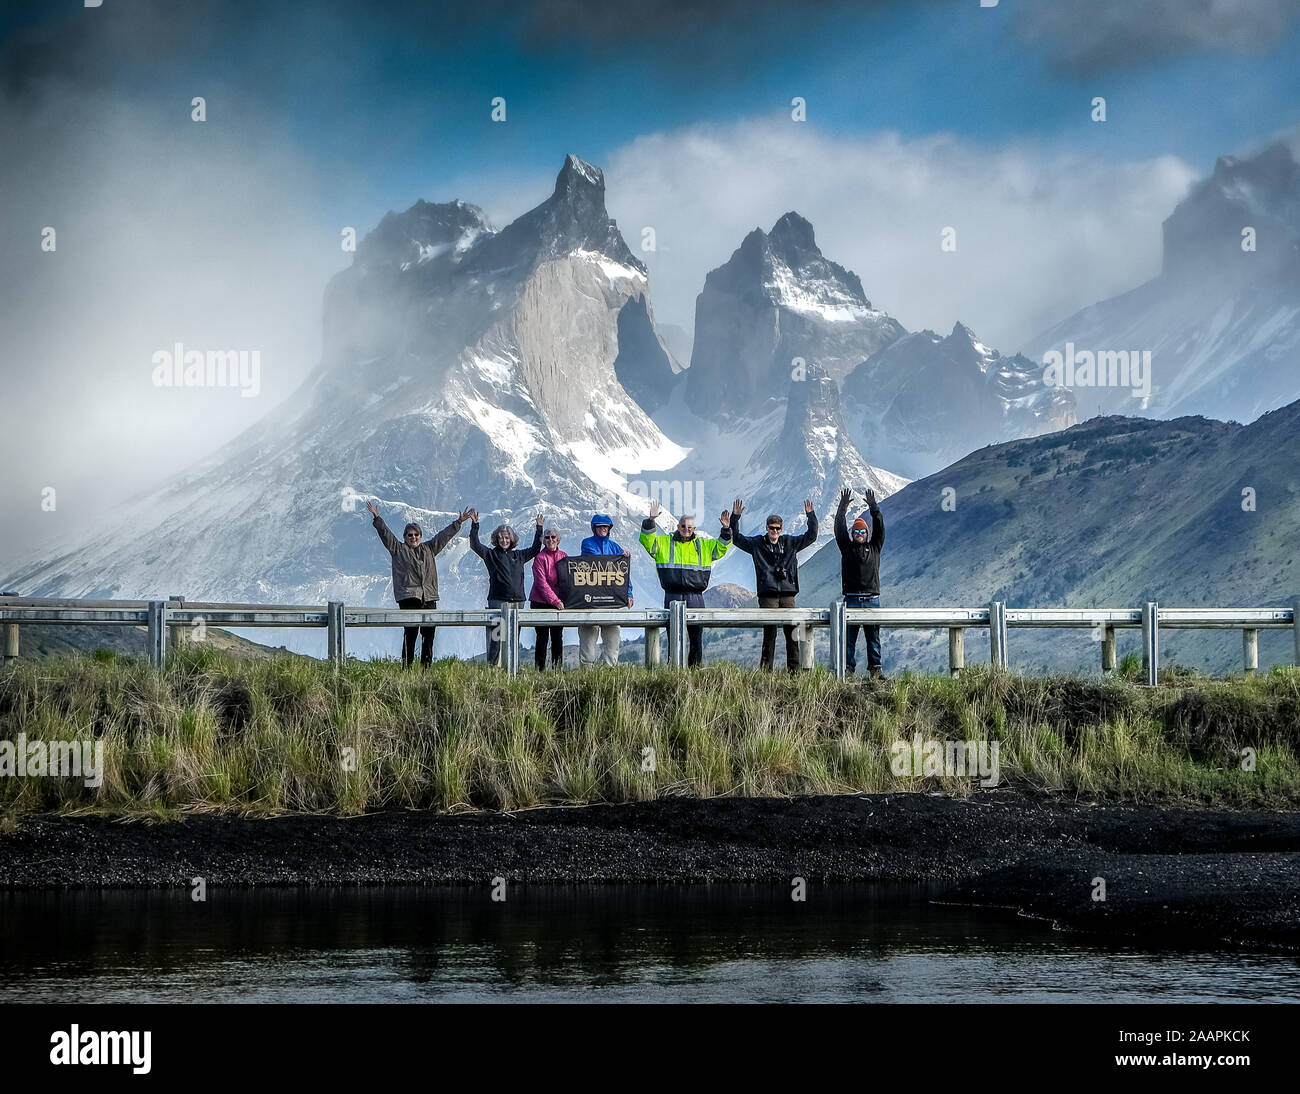 Photos Taken In Patagonia Chile And Argentina During A Small Group Photo Tour Managed By Alexmaureira Com Stock Photo Alamy